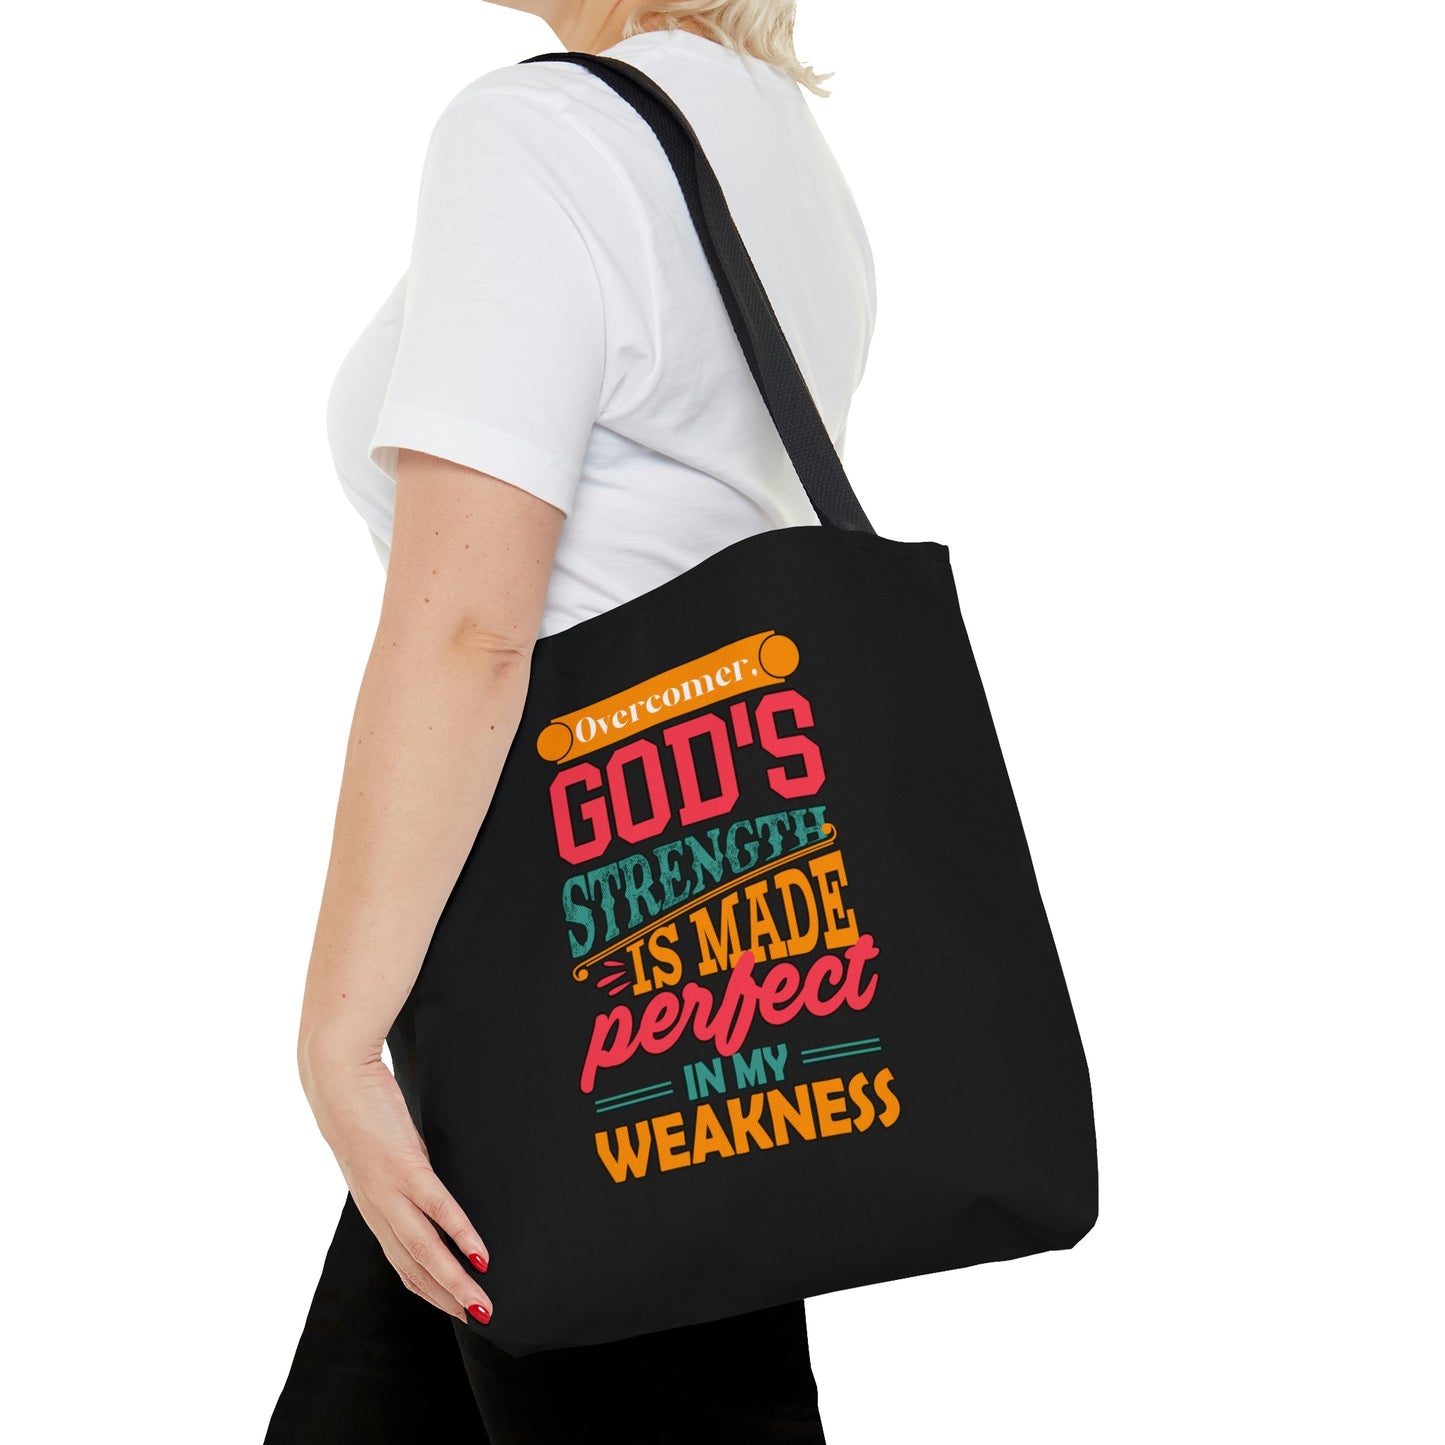 Overcomer, God's Strength Is Made Perfect In My Weakness Tote Bag